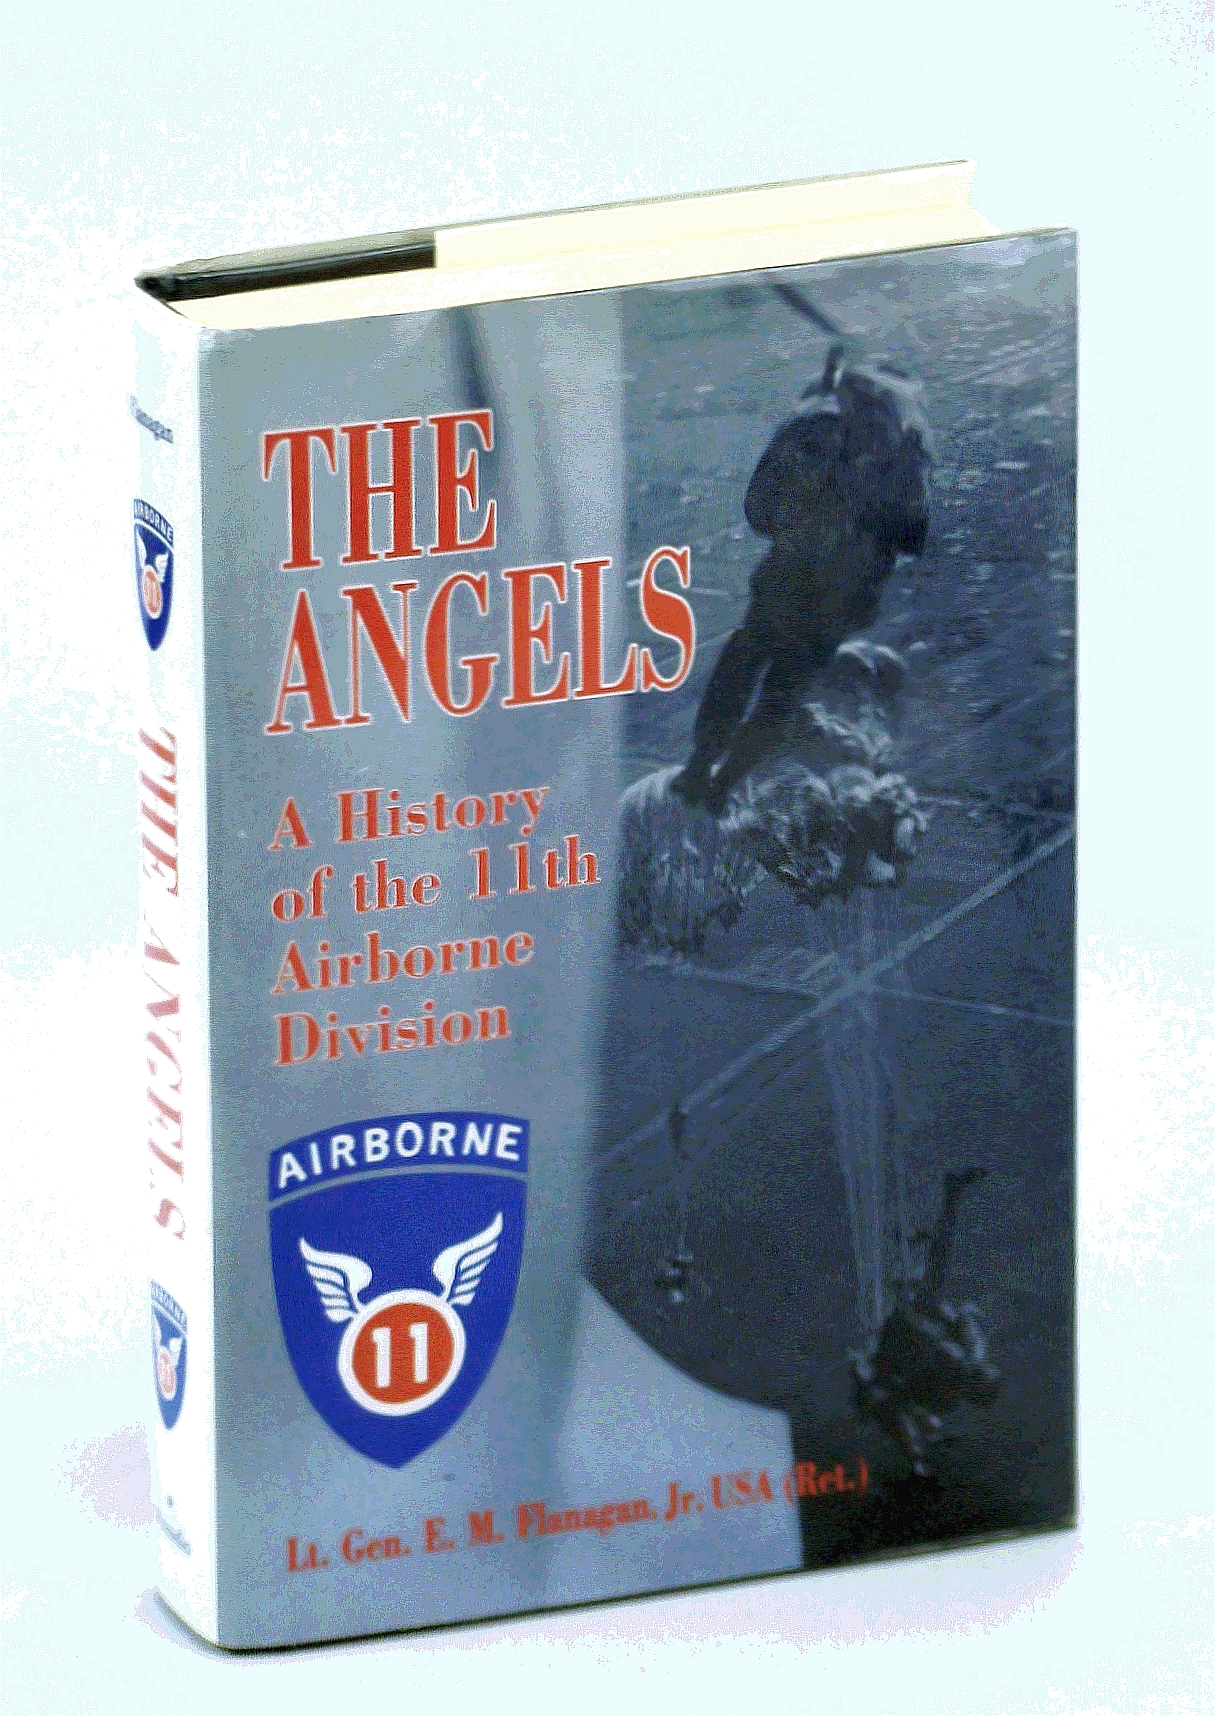 The Angels: A History of the 11th Airborne Division - E. M. Flanagan, Jr.